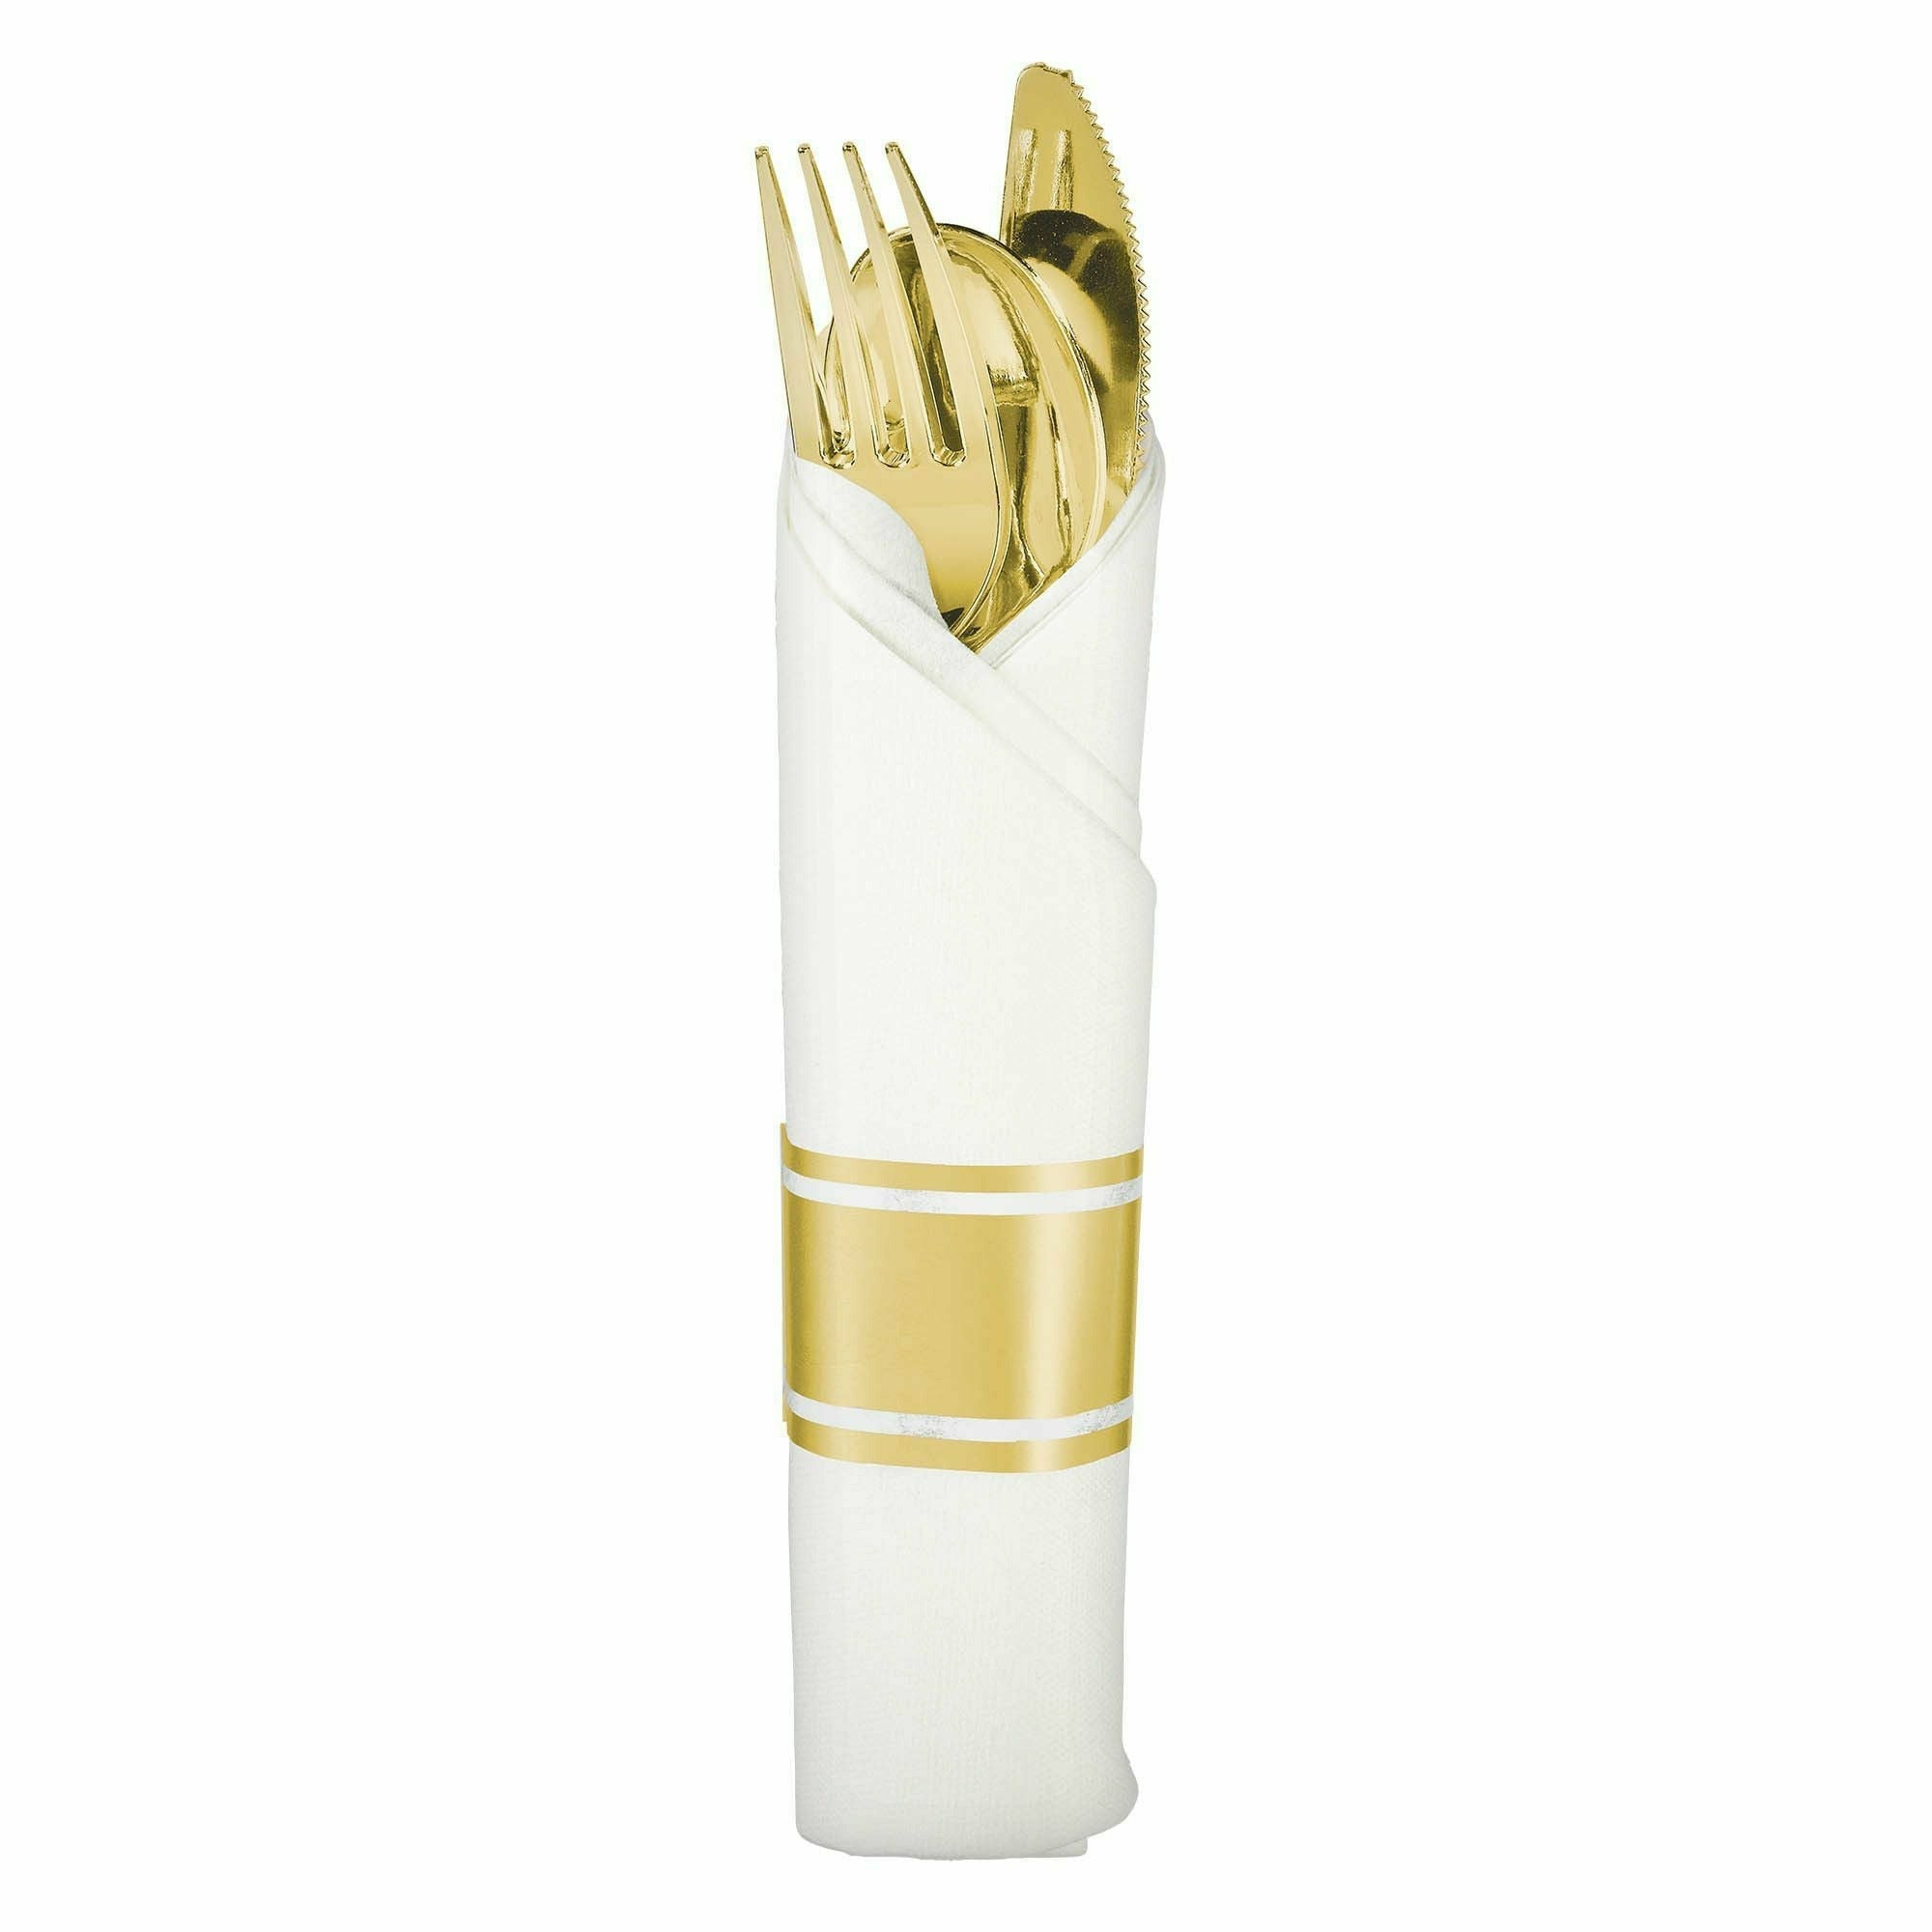 Amscan BASIC Rolled Cutlery - Gold